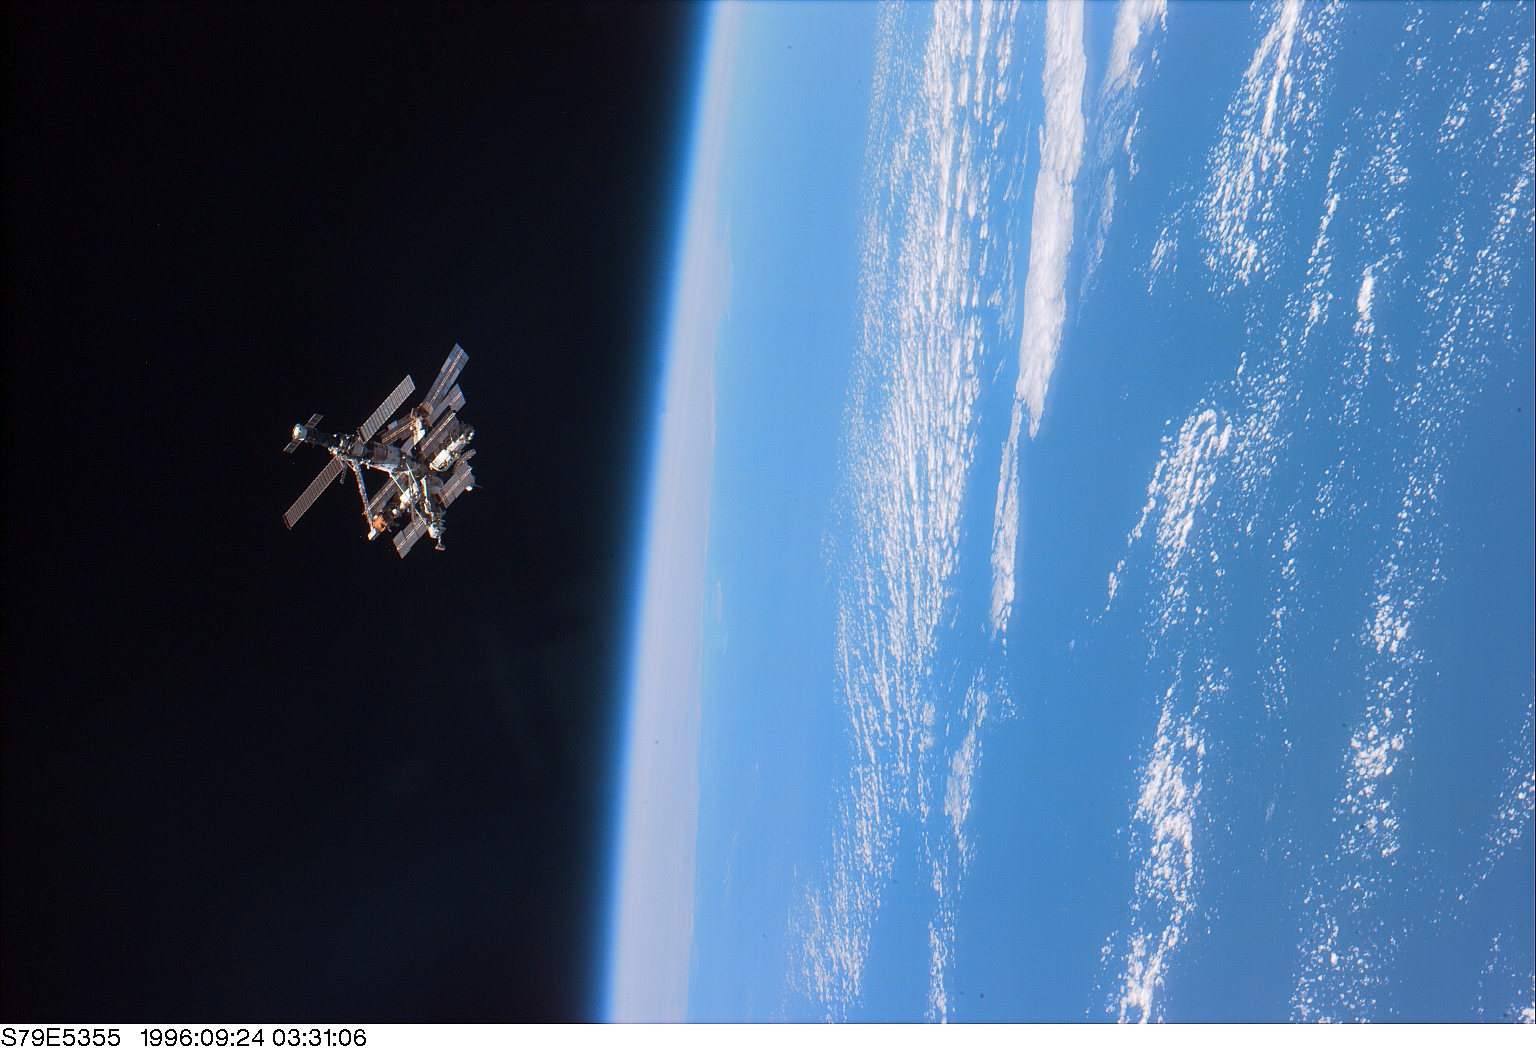 For the first time on STS-79, a shuttle crew saw Mir in its complete configuration, with six research and habitation modules. It had been Shannon Lucid's home for six months and would be John Blaha's home for the next four. Photo Credit: NASA